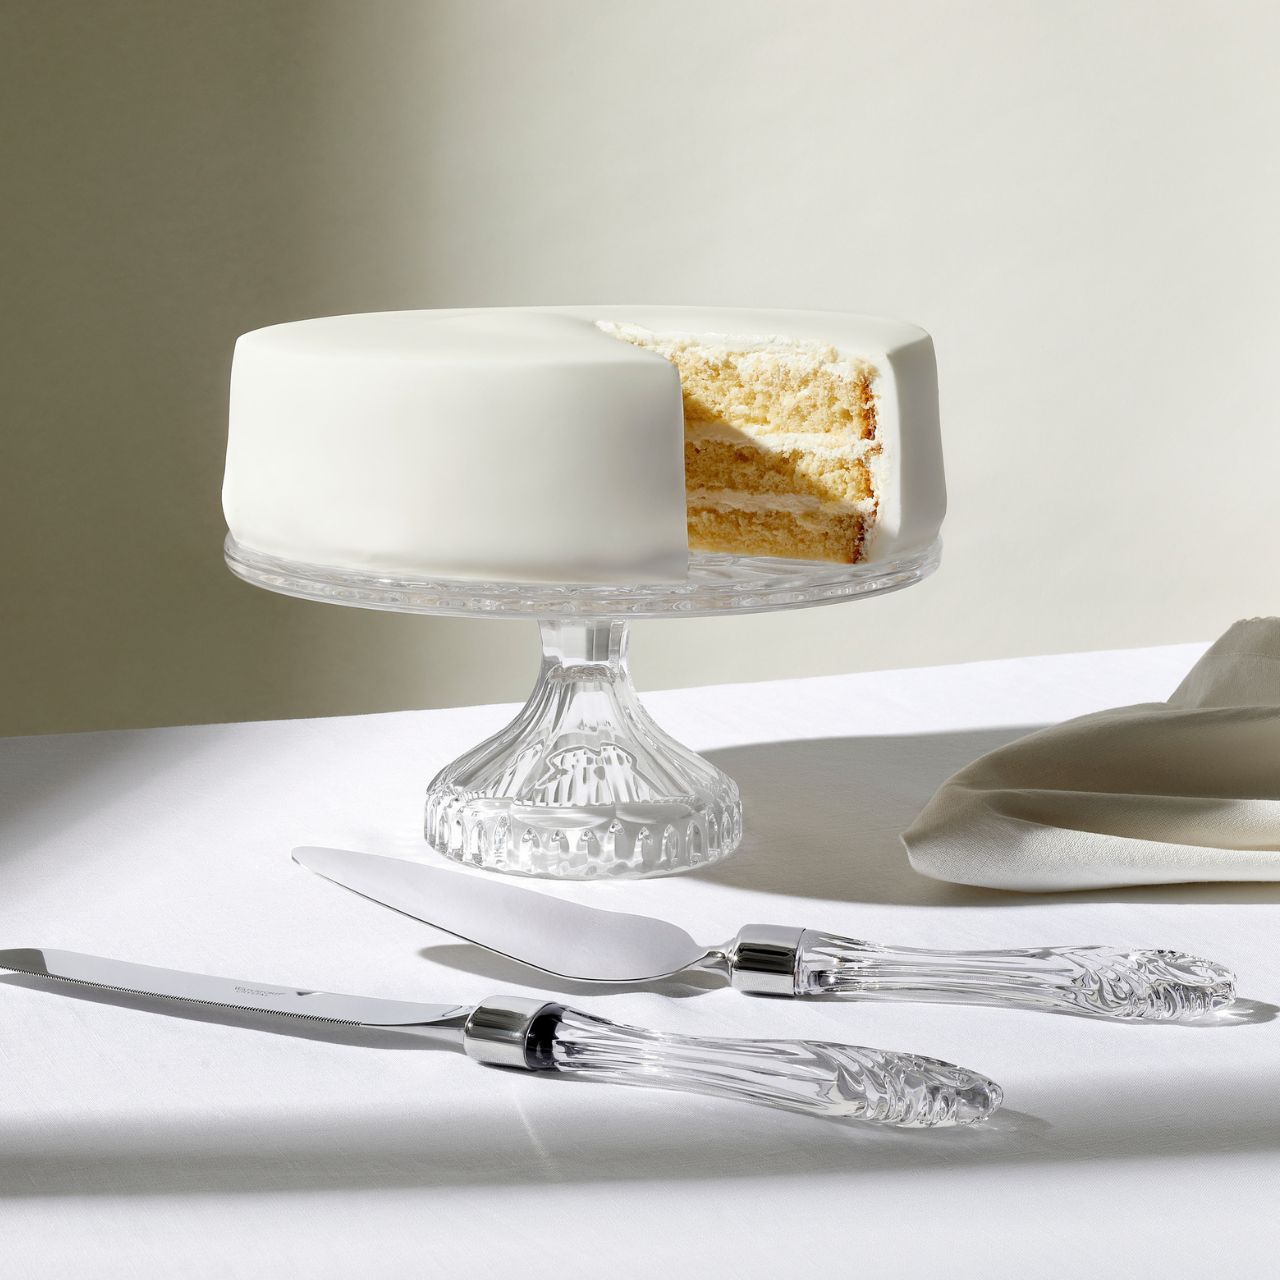 Lismore Cake Plate - Footed by Waterford Crystal  Featuring the iconic Lismore pattern, the Lismore Gift Bar Collection is inspired by the rich heritage of Ireland with pieces designed to be used and enjoyed. The Lismore Cake Plate 11 inch is perfect for serving up delicious cakes, sandwiches and biscuits. Lismore's signature diamond and wedge cuts create a brilliance and clarity that turns ordinary presentations into a special event.